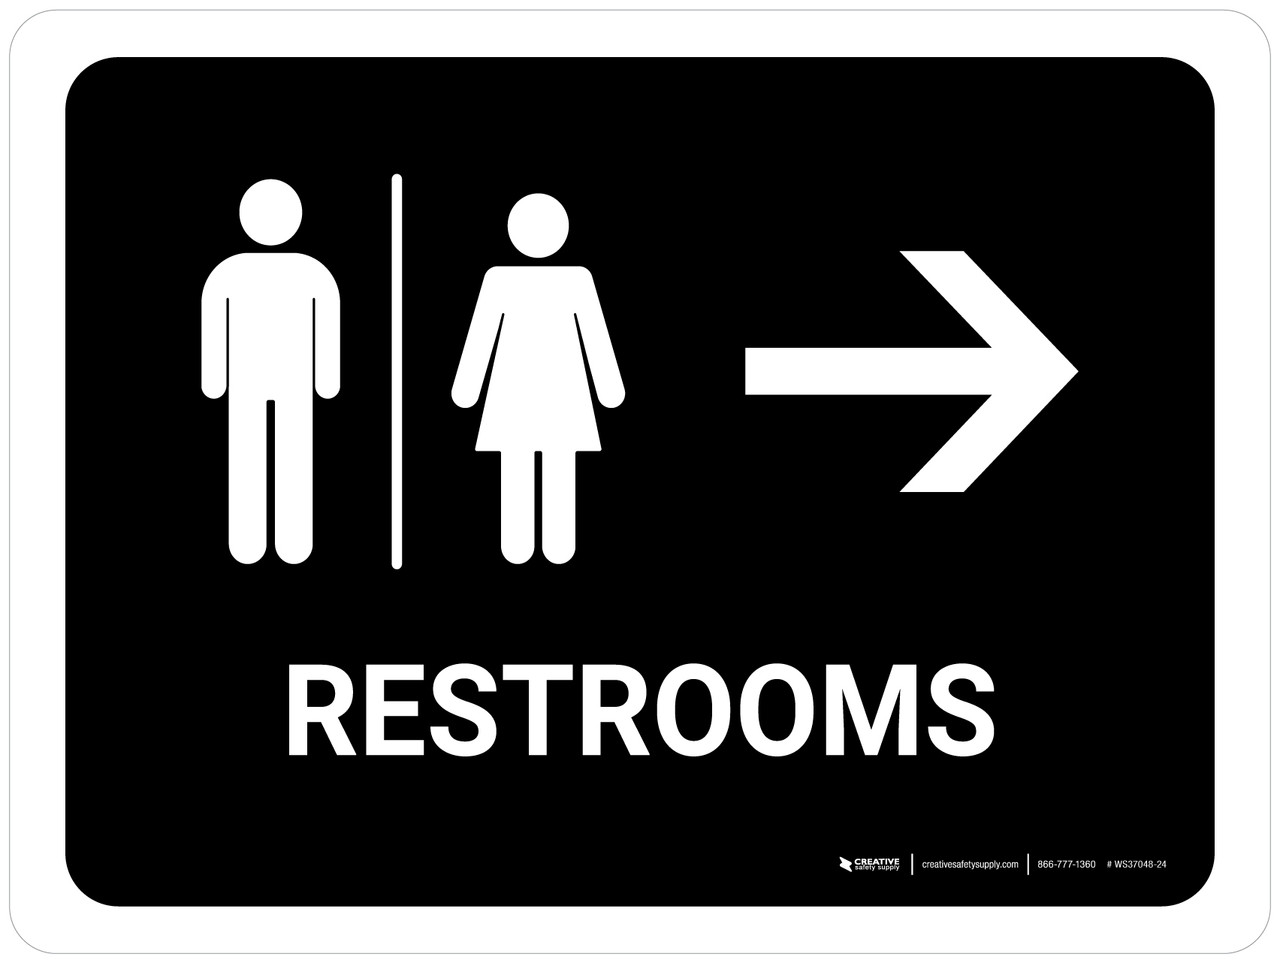 restroom sign with arrow